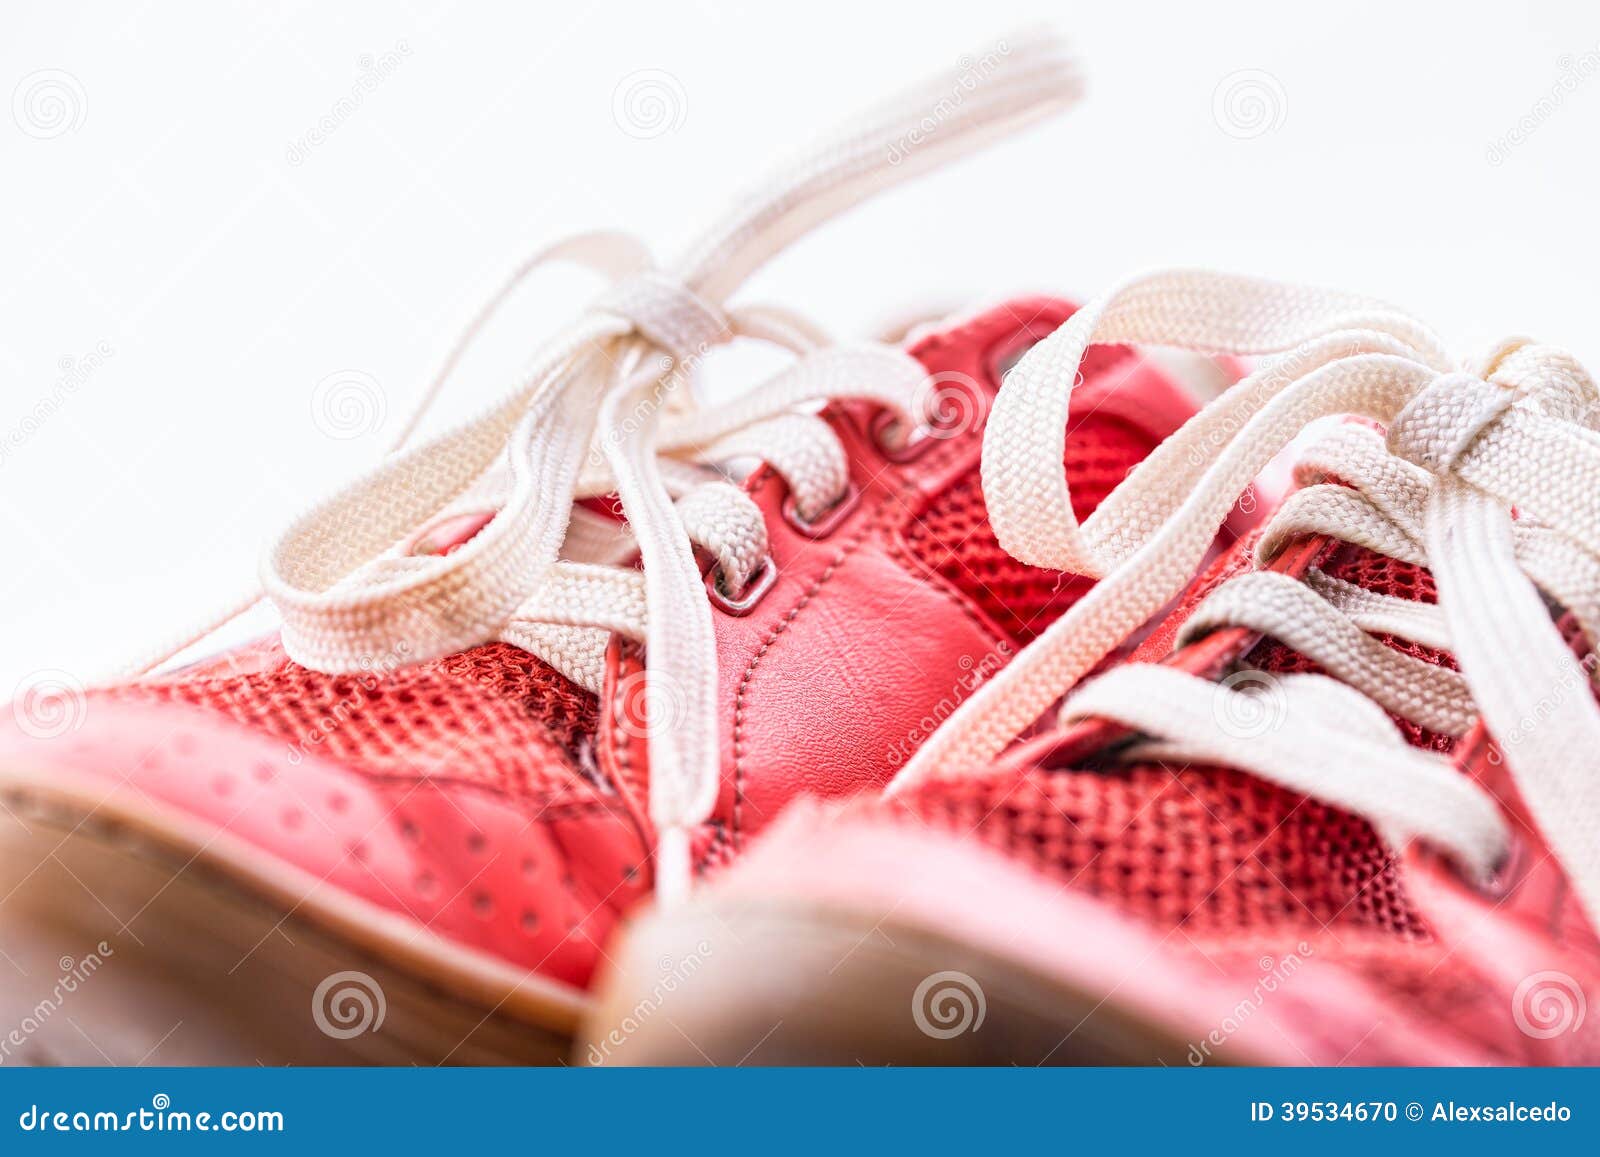 Old shoes stock photo. Image of hand, pair, fashion, skateboard - 39534670